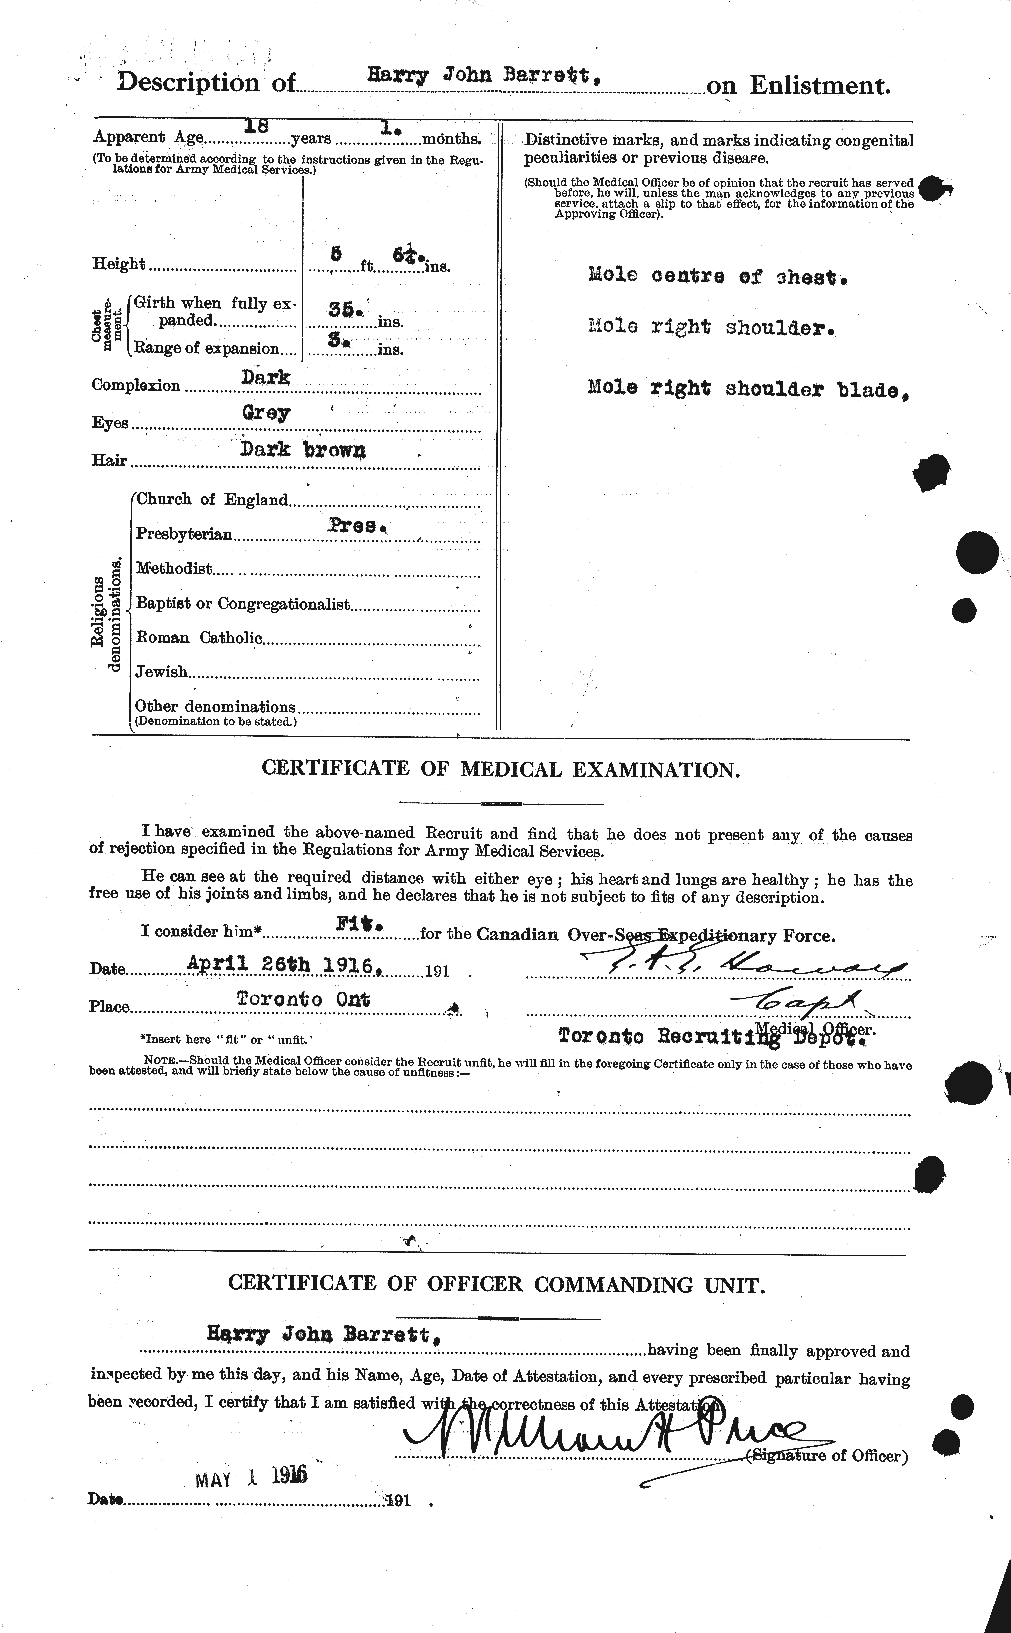 Personnel Records of the First World War - CEF 220290b